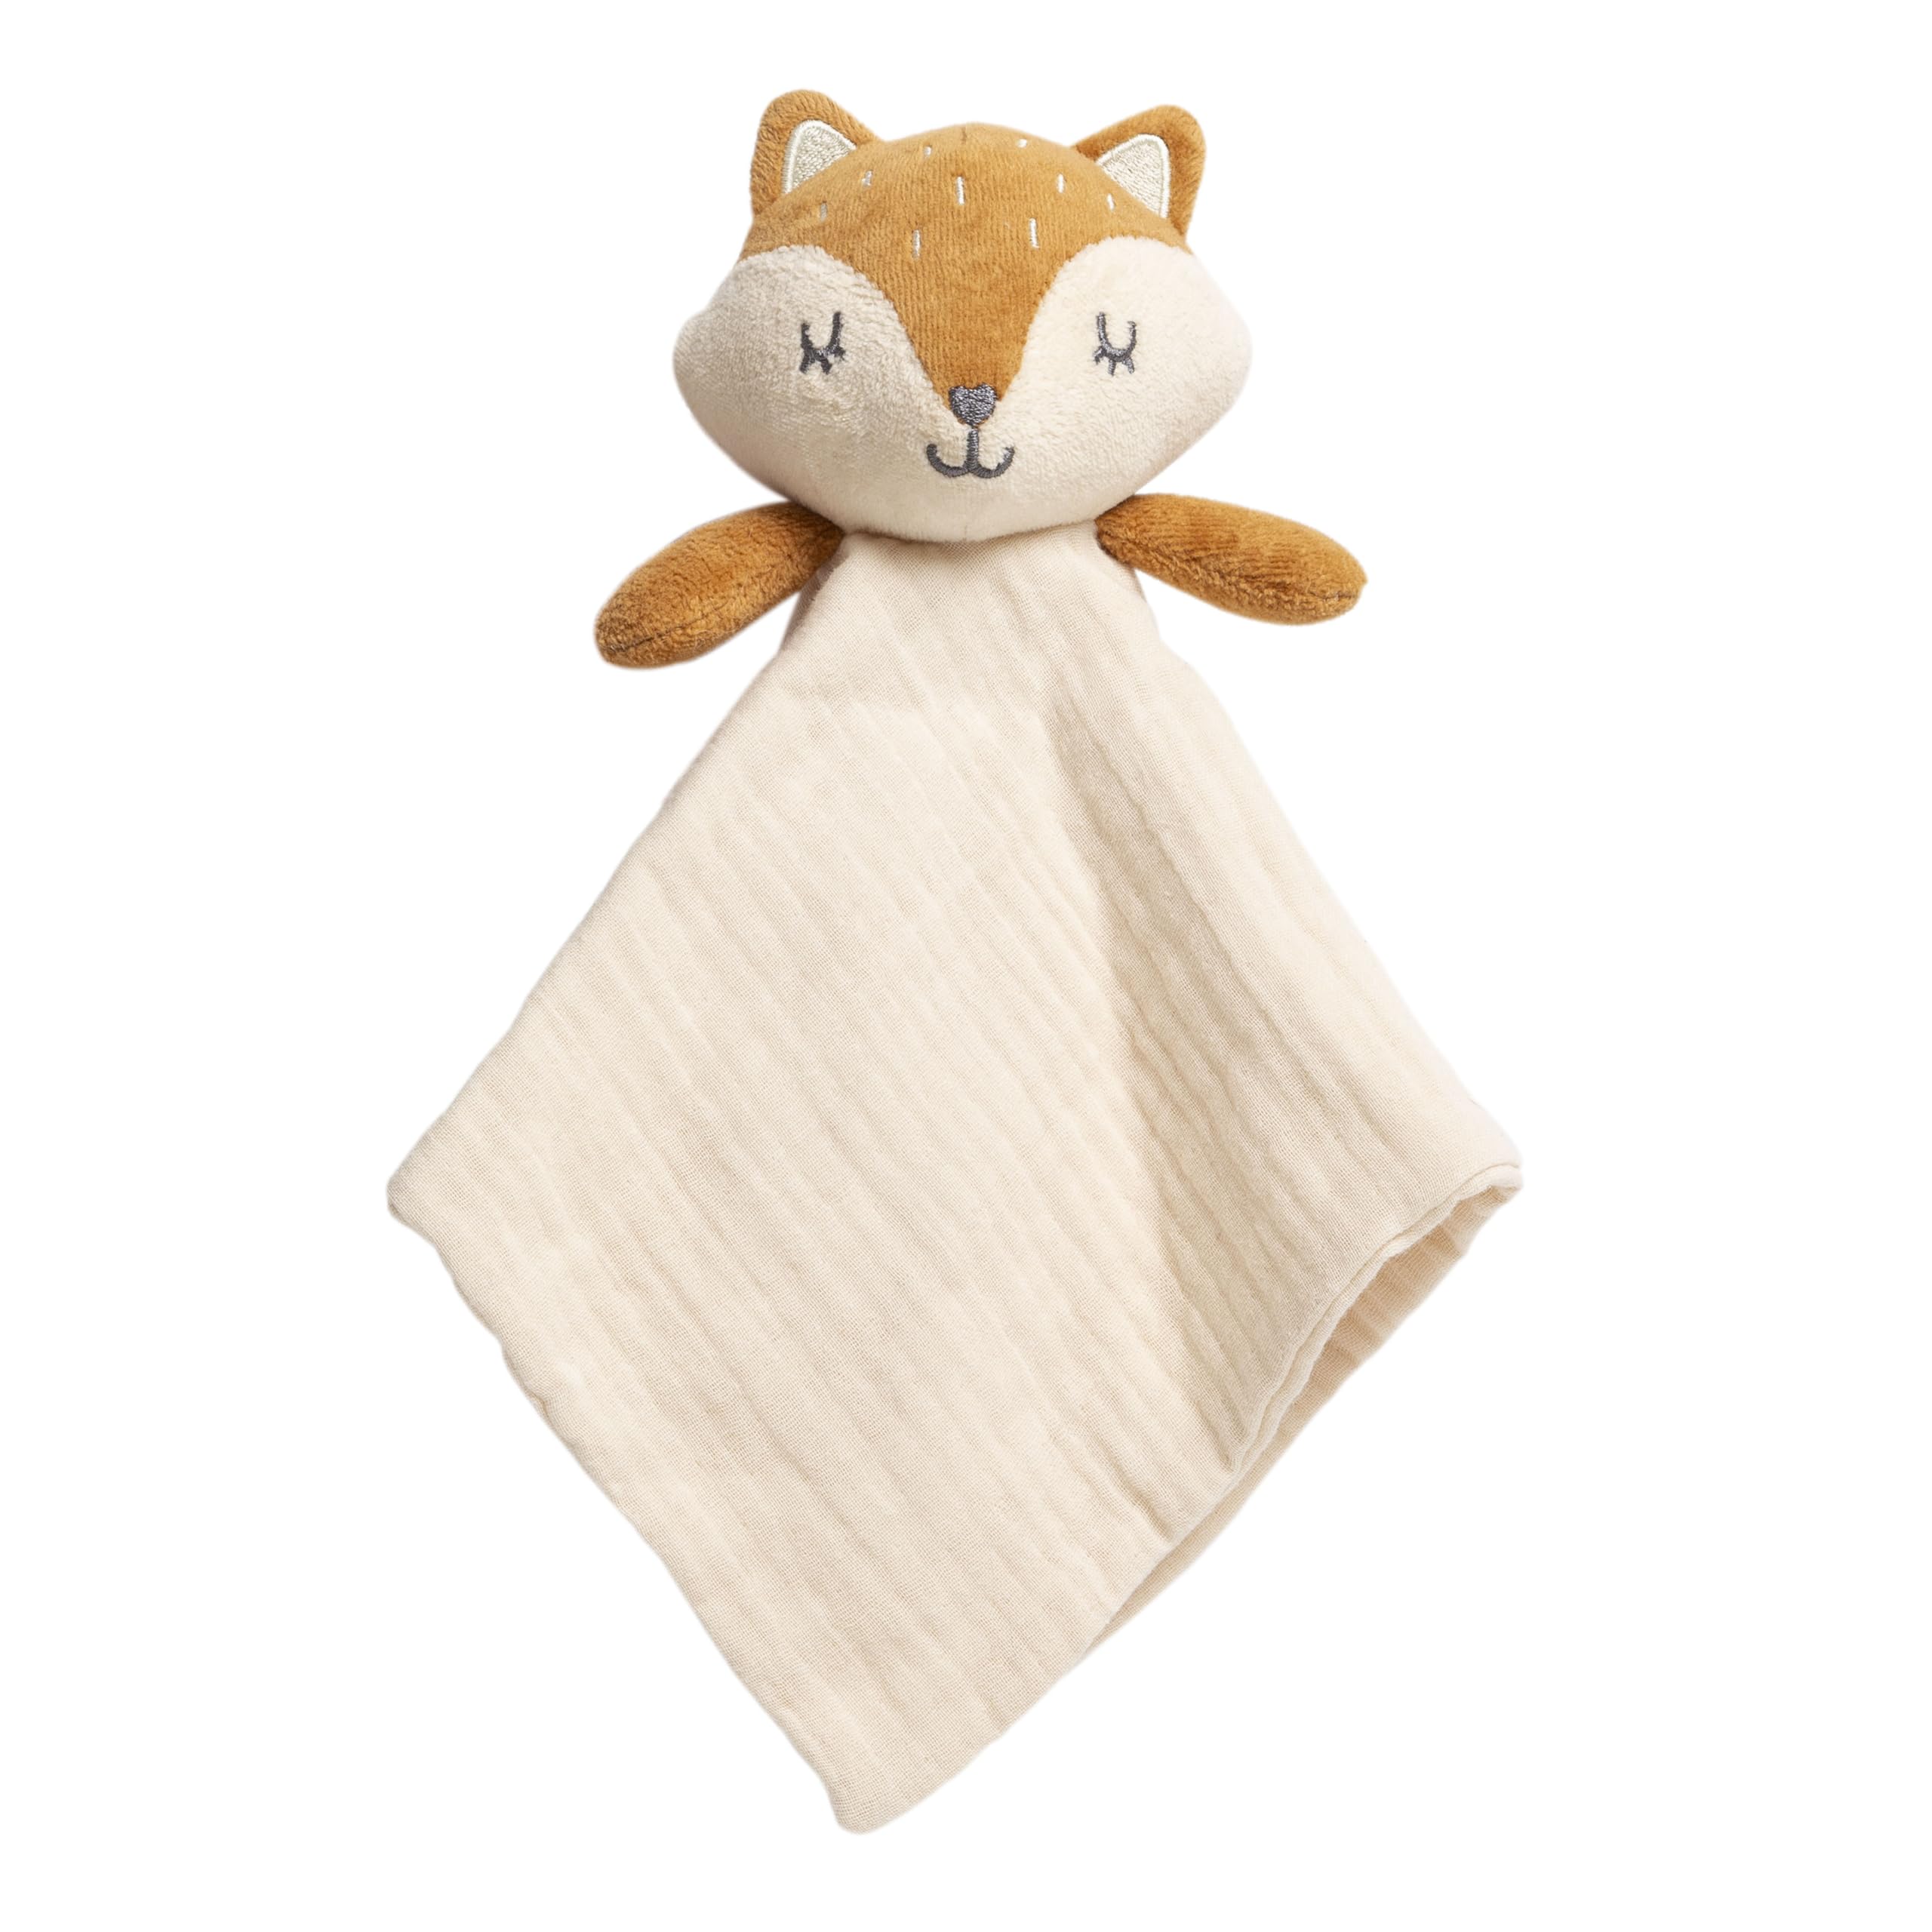 Pearhead Fox Snuggle Baby Blanket, Soft Lovey Blanket for Babies, Snuggle Toy for Newborns, Neutral Baby Security Blanket, Organic Cotton Muslin Baby Blanket